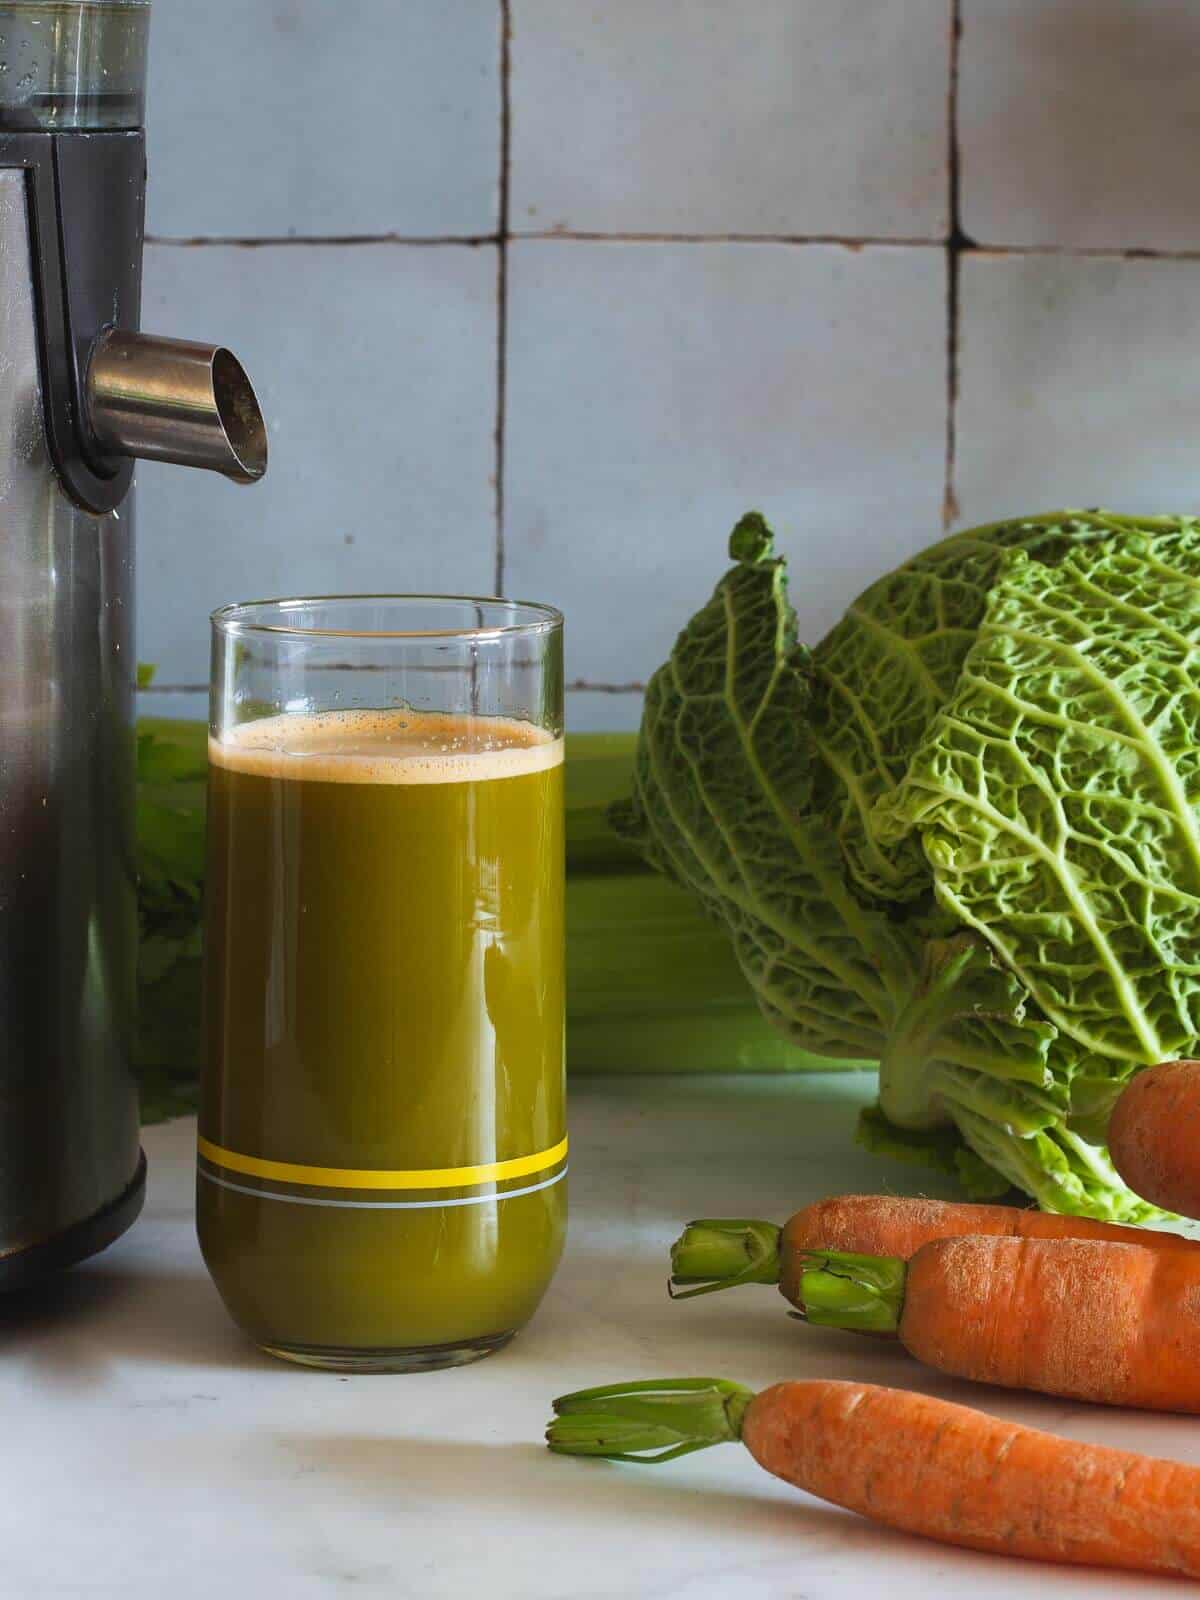 juicing carrots, cabbage, and celery